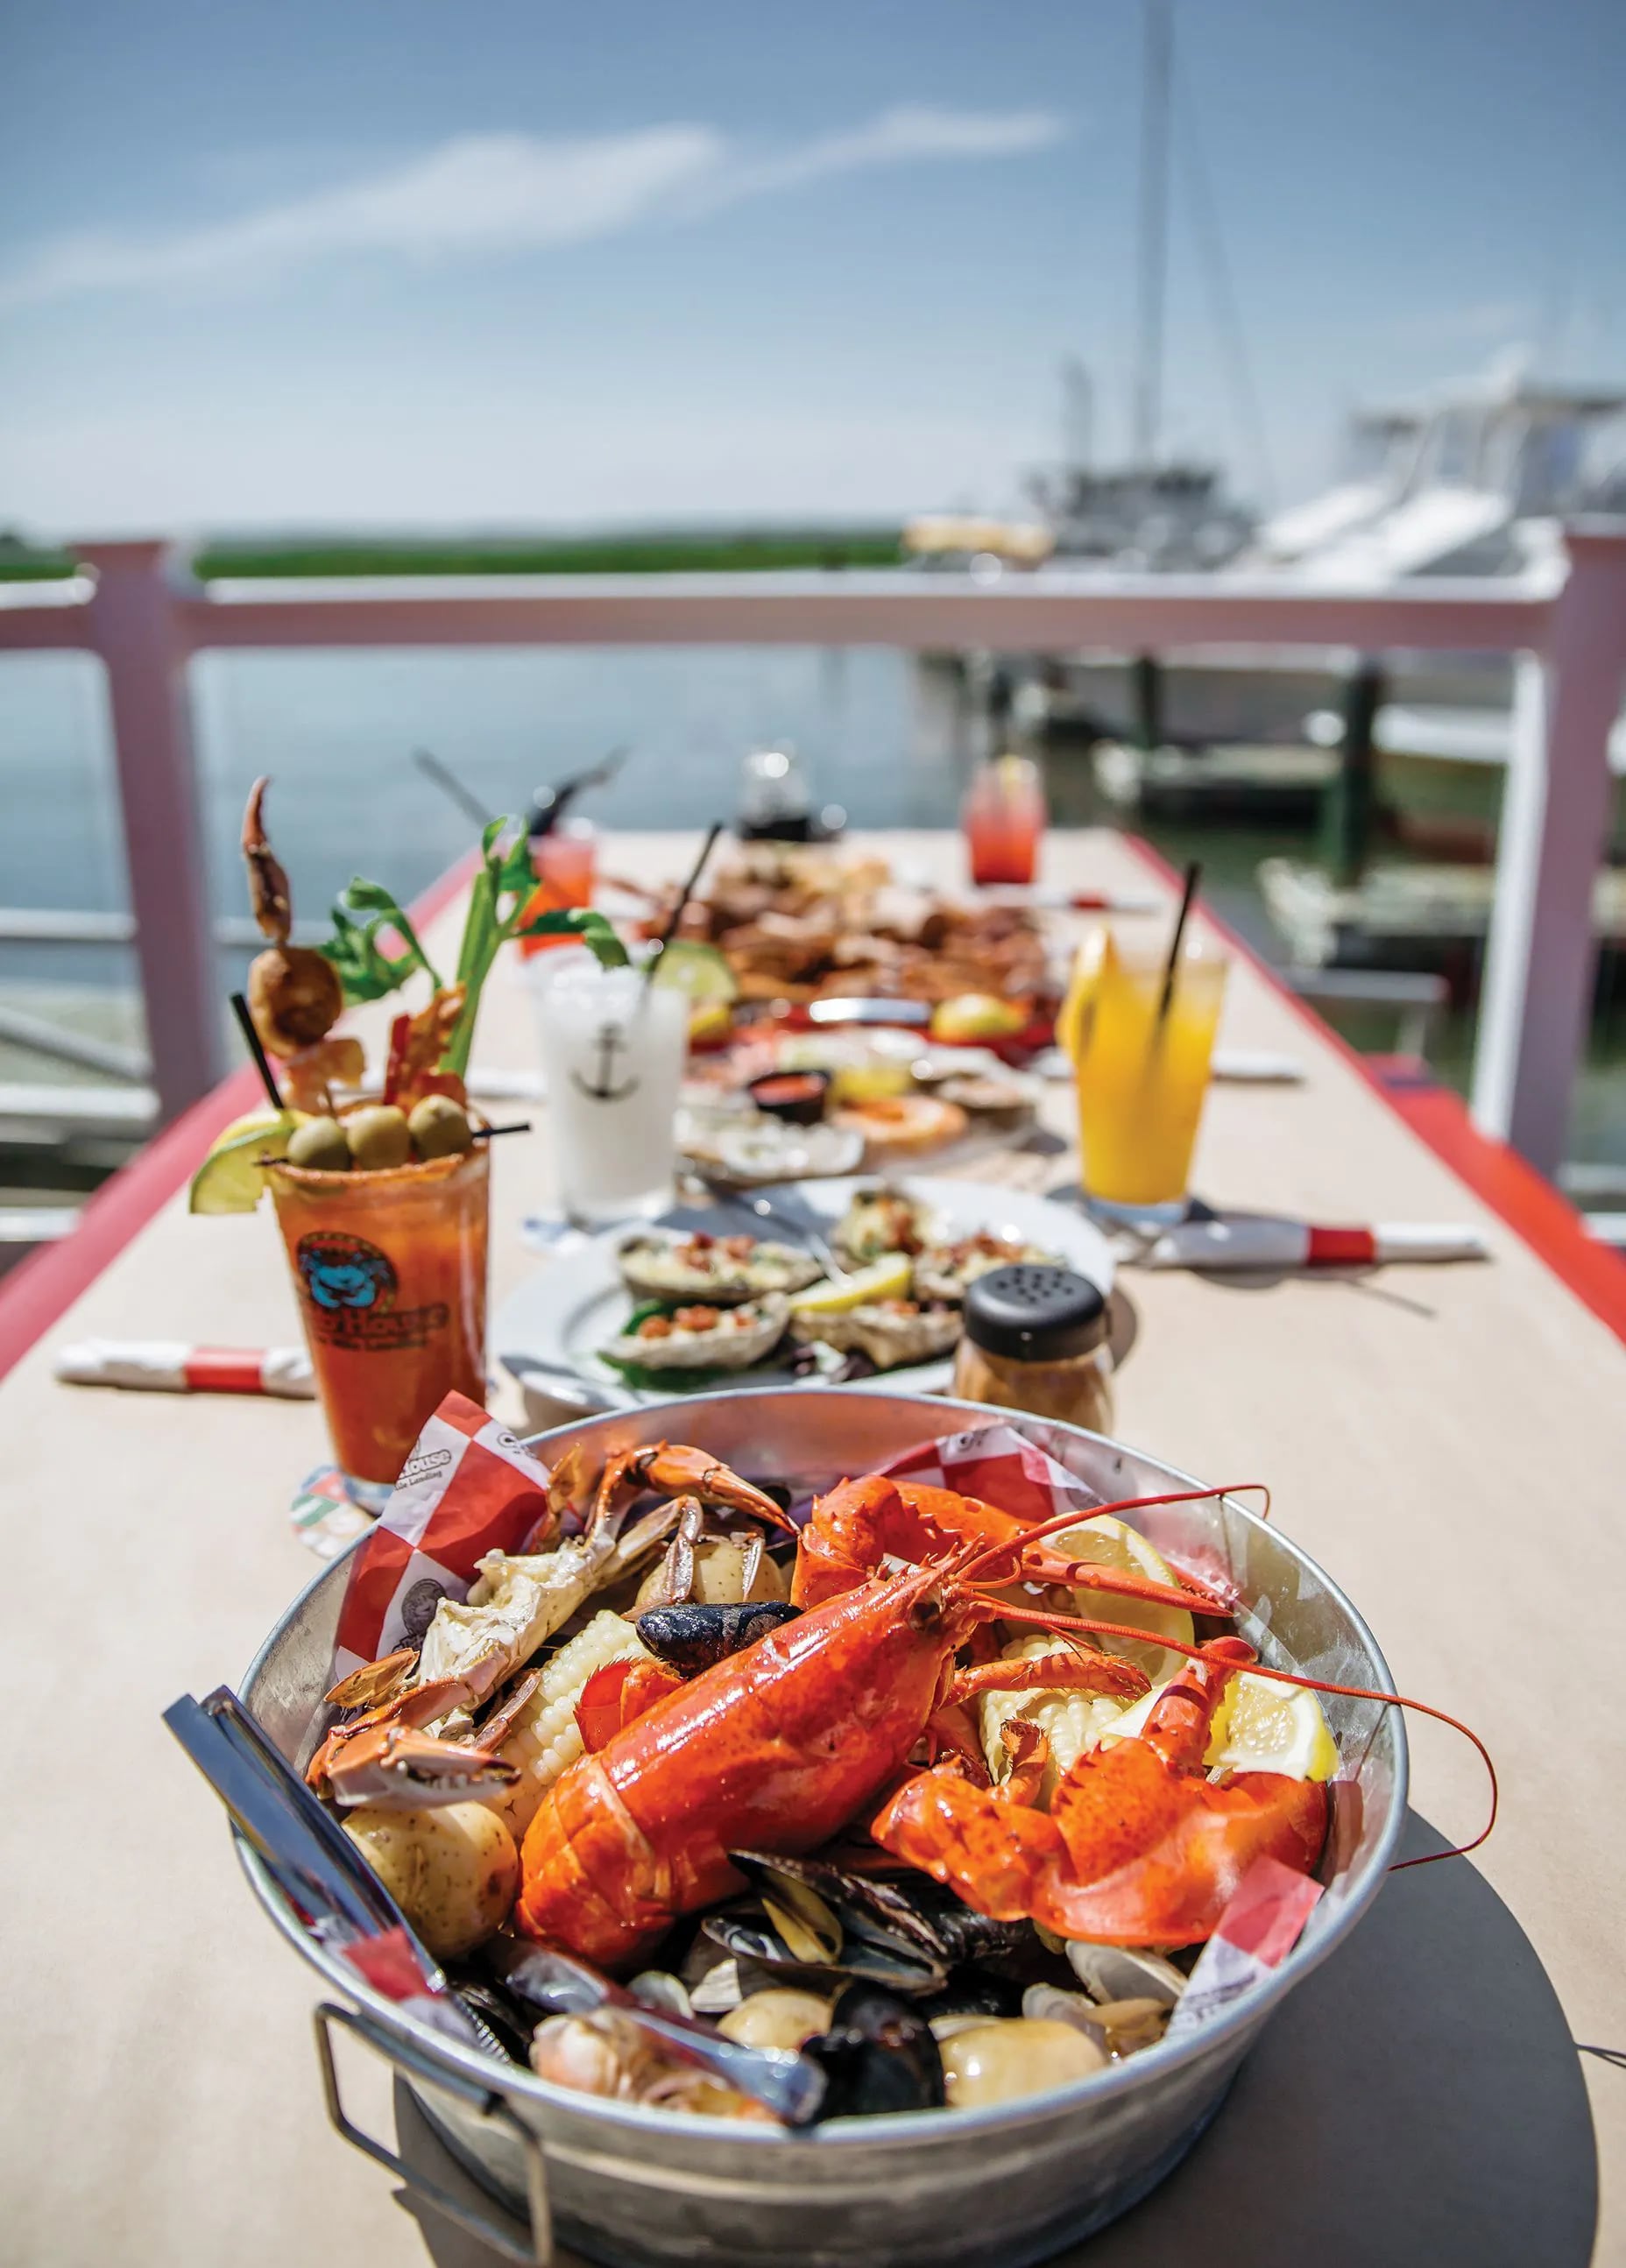 Brunch cocktails and a spread of seafood at The Crab House, part of Two Mile Landing in Wildwood Crest, NJ.